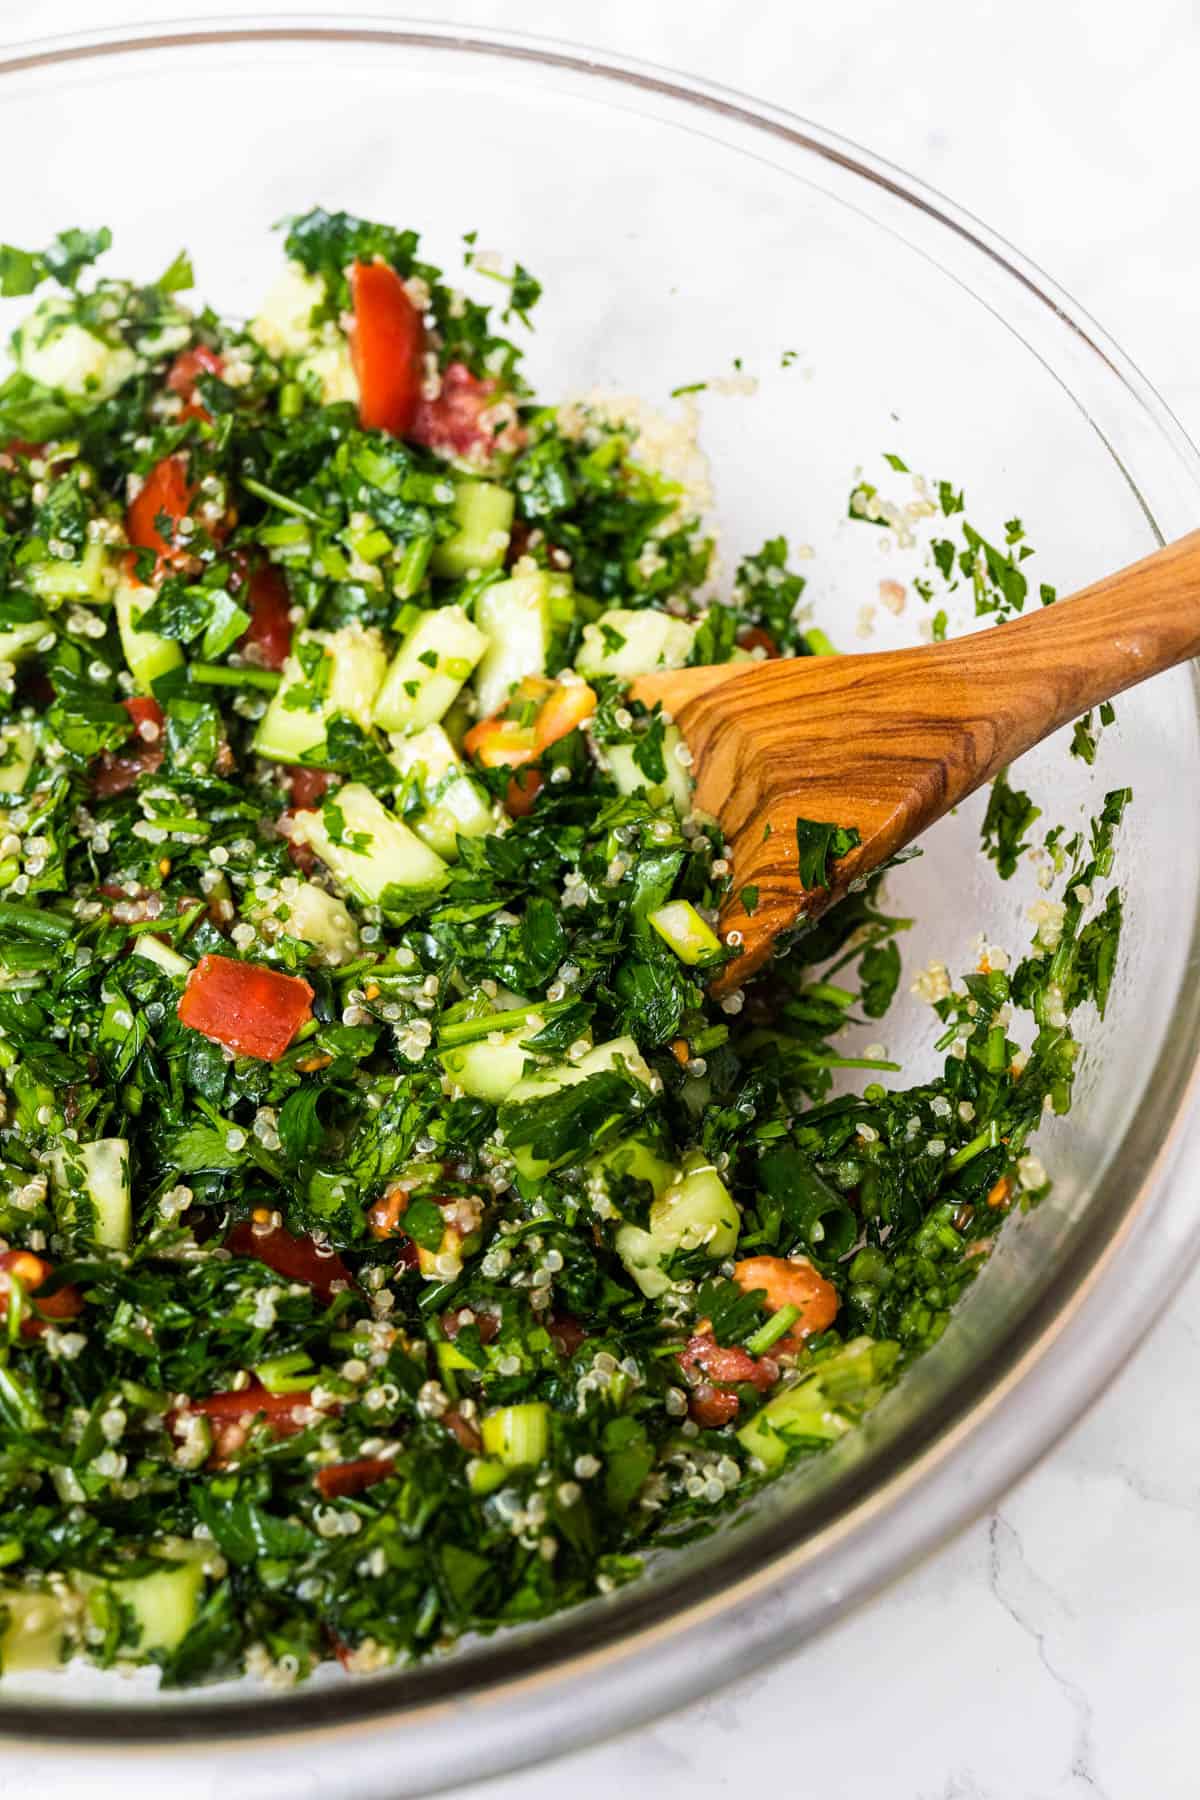 Large salad bowl filled with quinoa tabouli